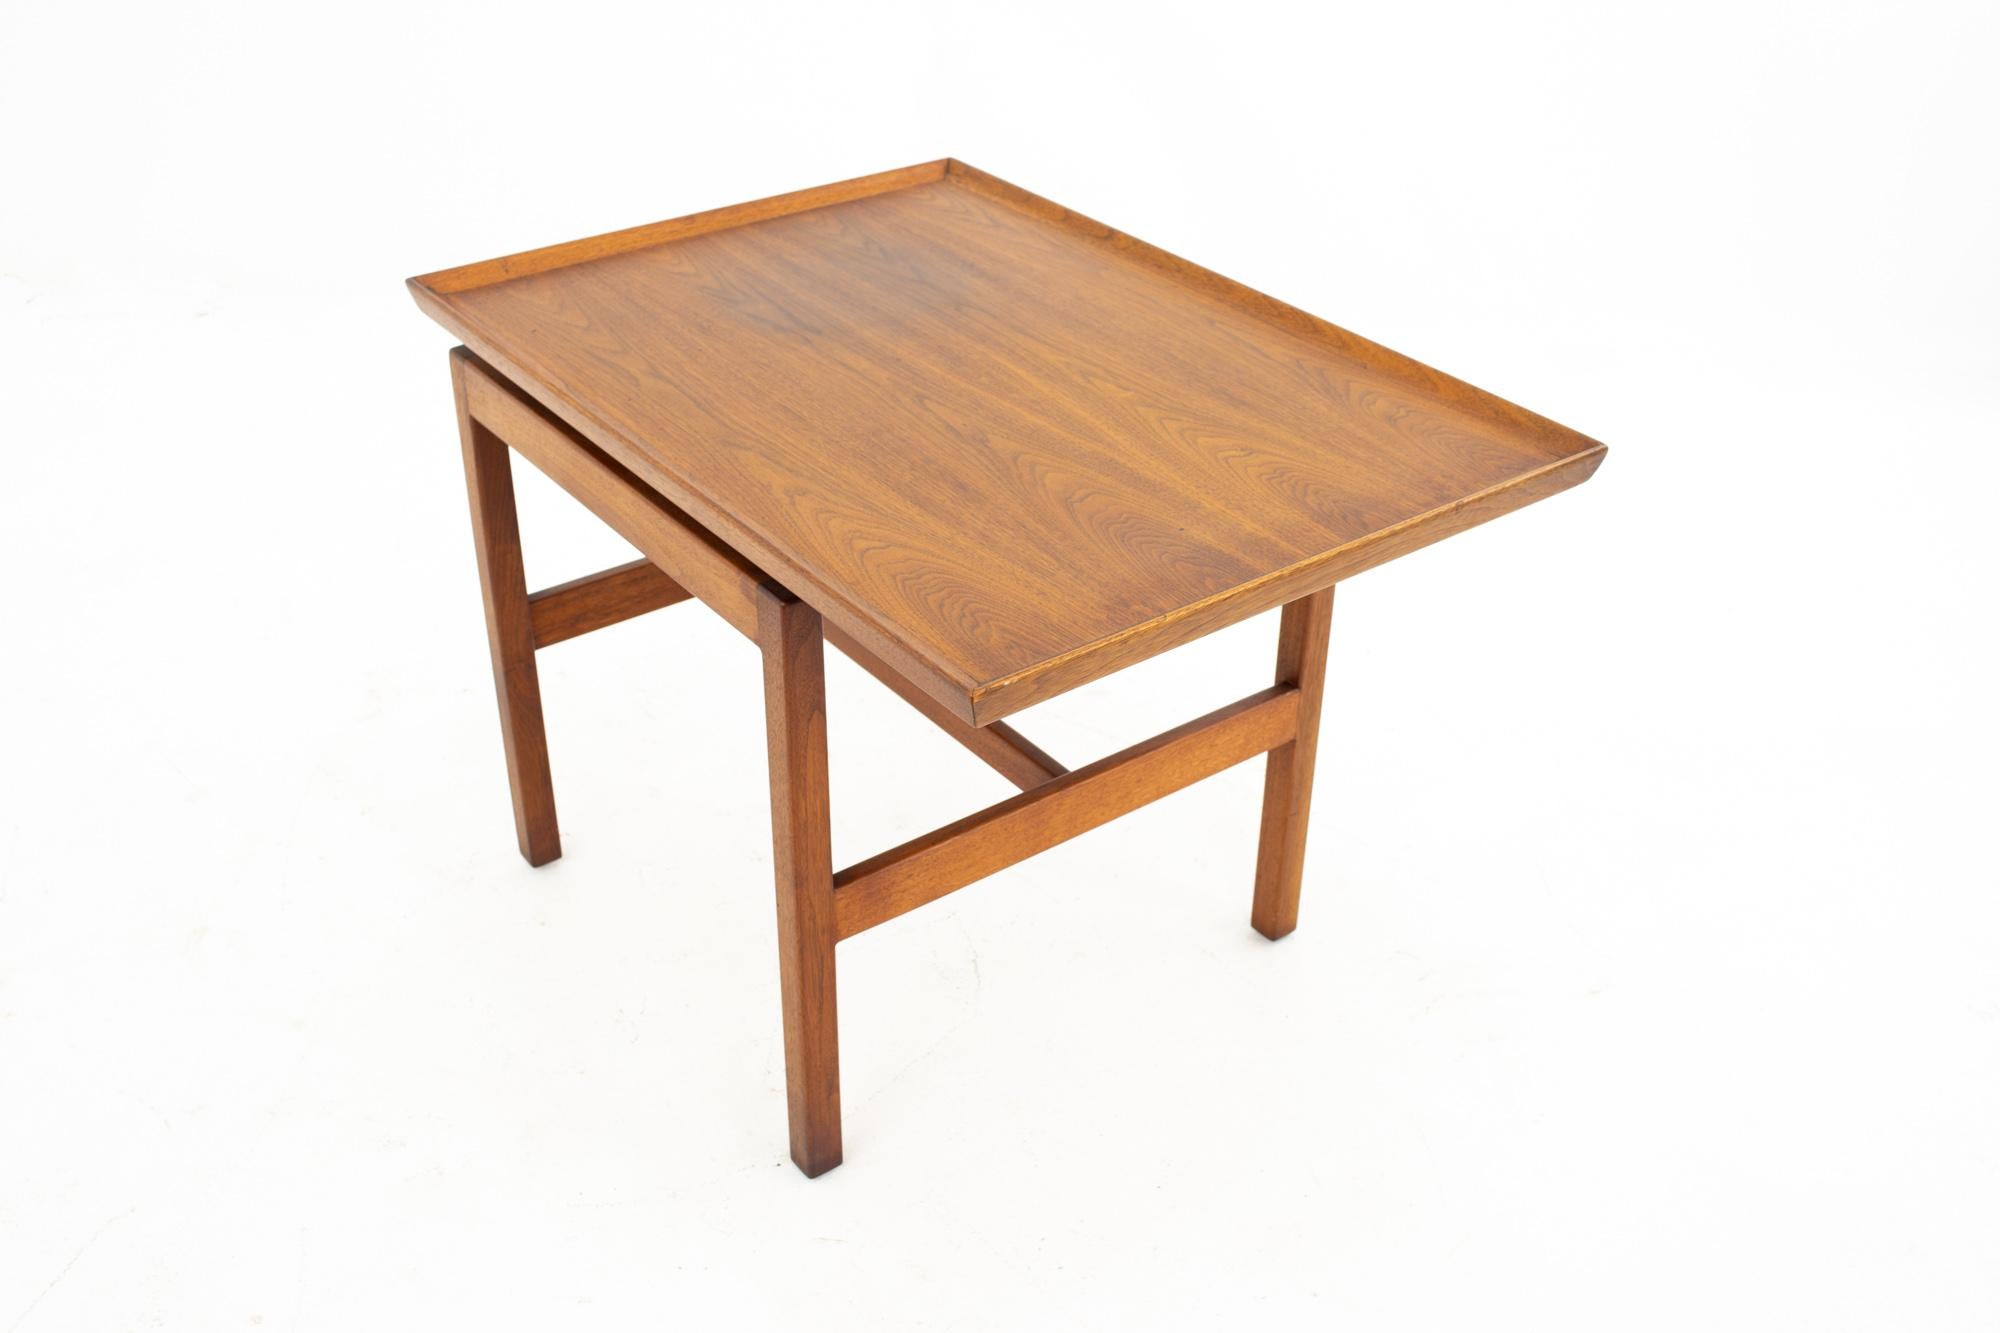 Jens Risom Mid Century walnut side end table
Size: 21 wide x 30 deep x 22 high  

This piece is available in what we call restored vintage condition. Upon purchase it is fixed so it’s free of watermarks, chips or deep scratches with color loss; as